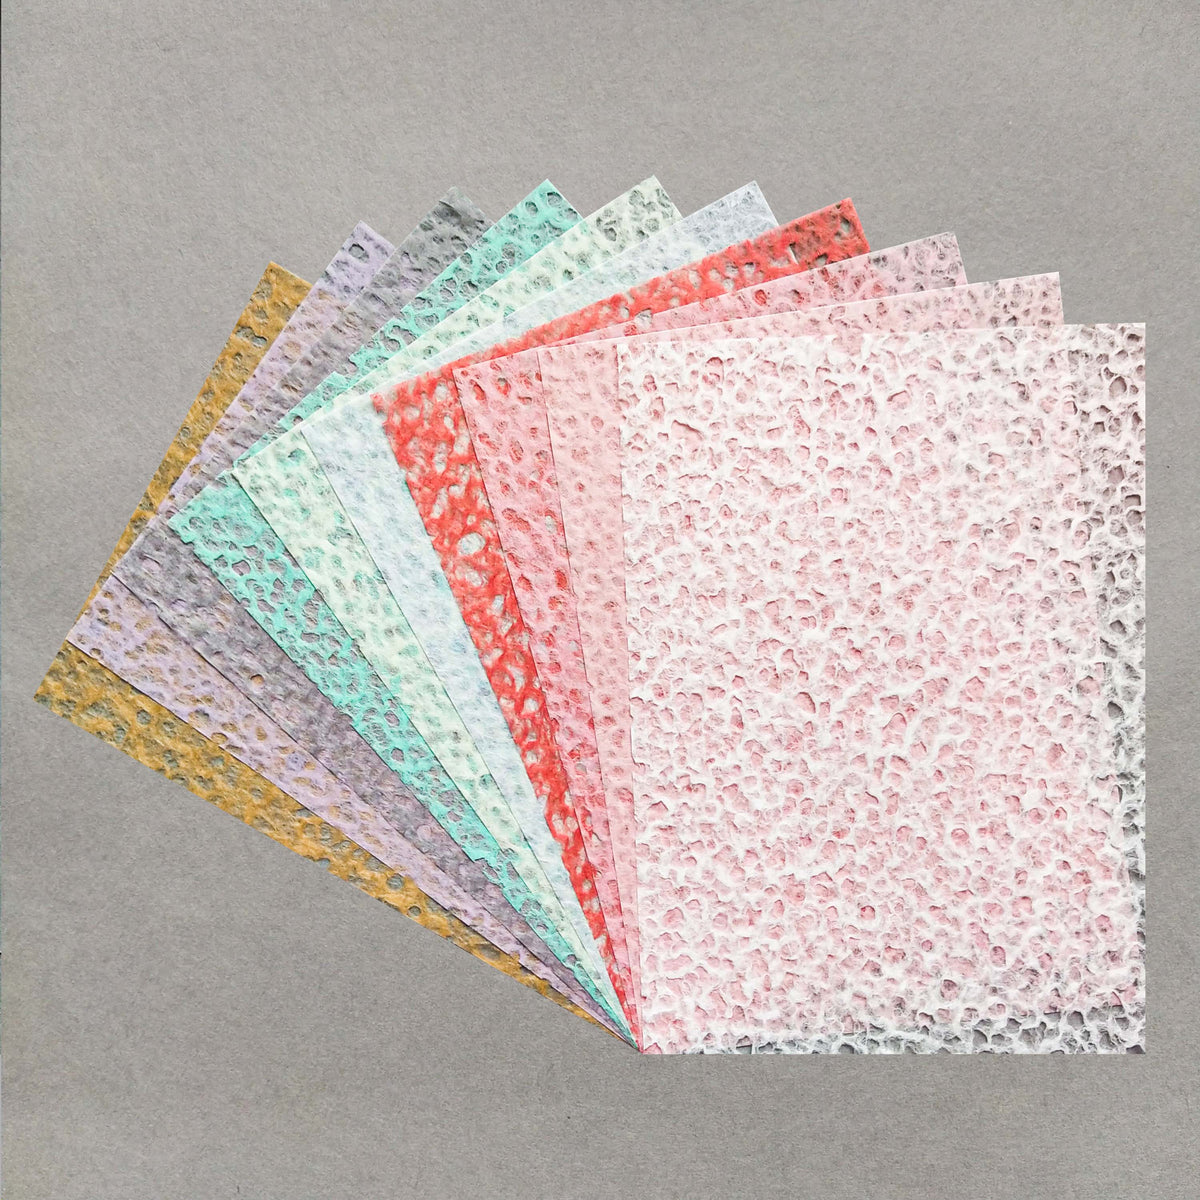 KZ Studio - Assorted A4 Lace Kozo Paper Set 27 Sheets Premium Washi  Mulberry Papers for Arts Crafts Card Making